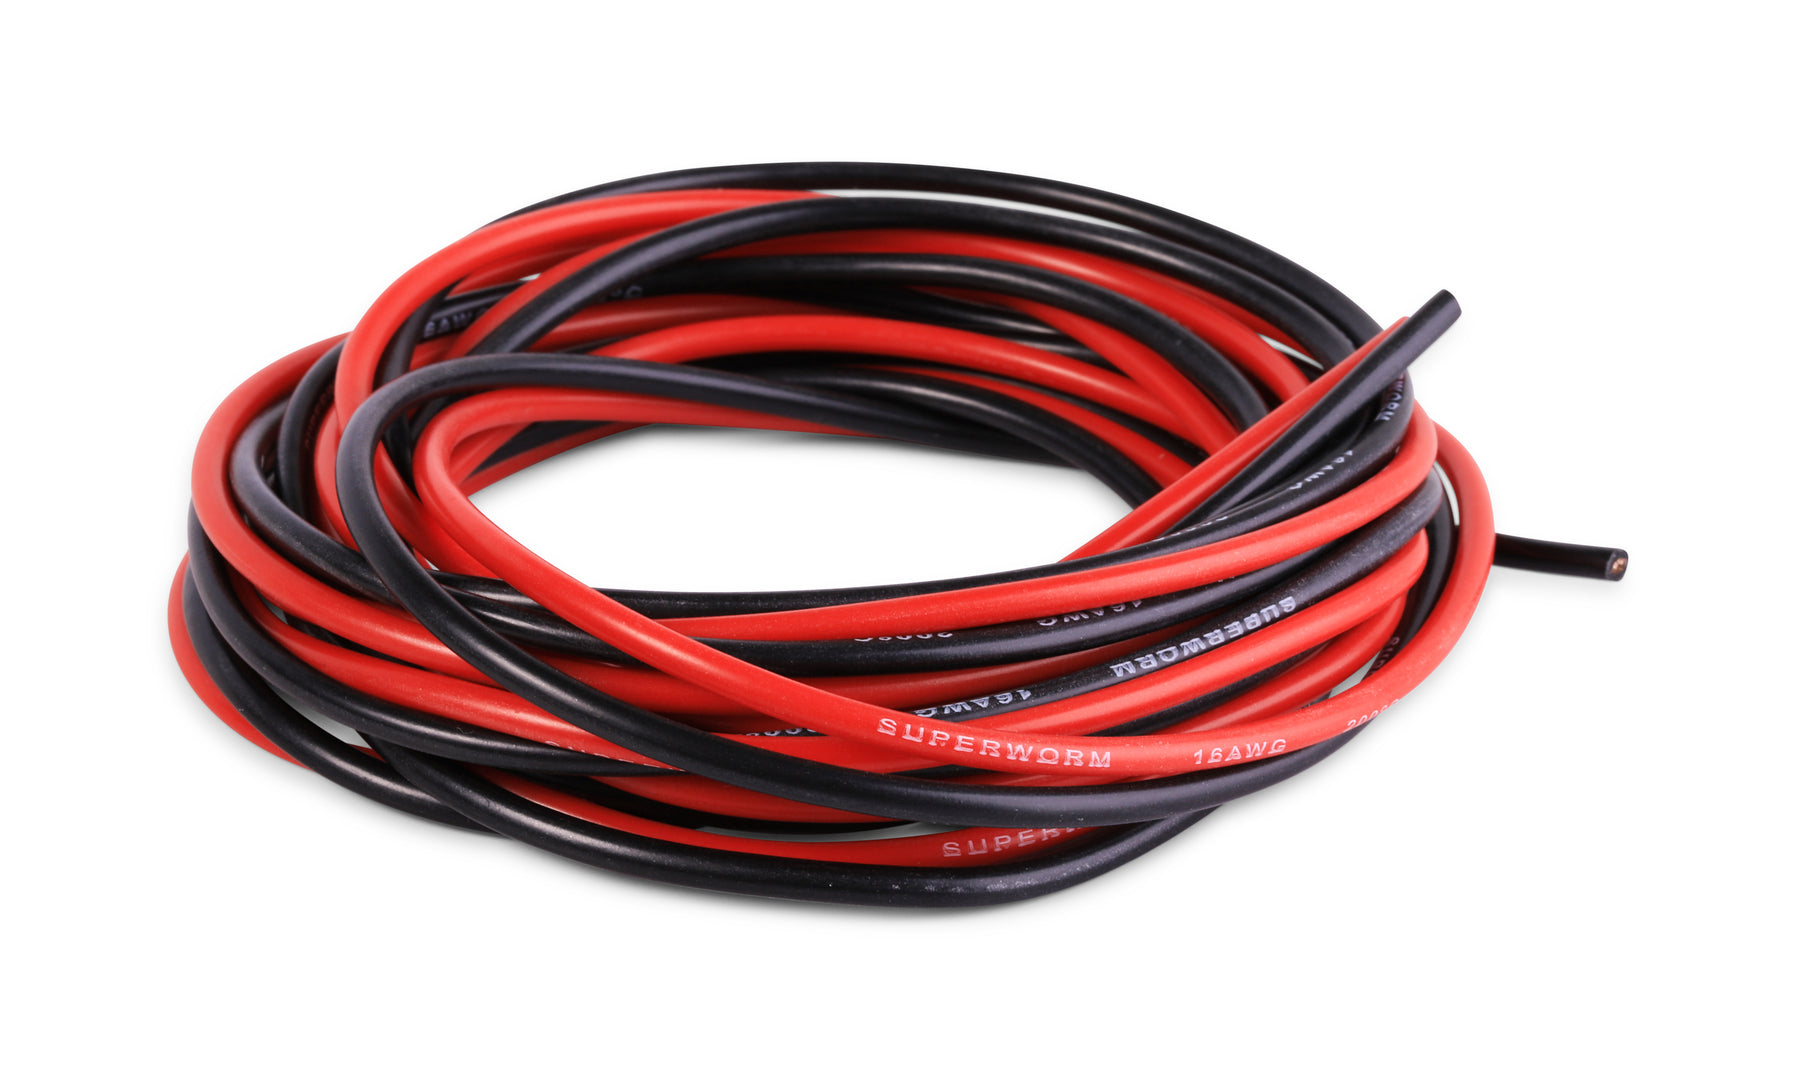 BNTECHGO 18 Gauge Silicone Wire 10 ft Red and 10 ft Black Flexible 18 AWG Stranded Tinned Copper Wire